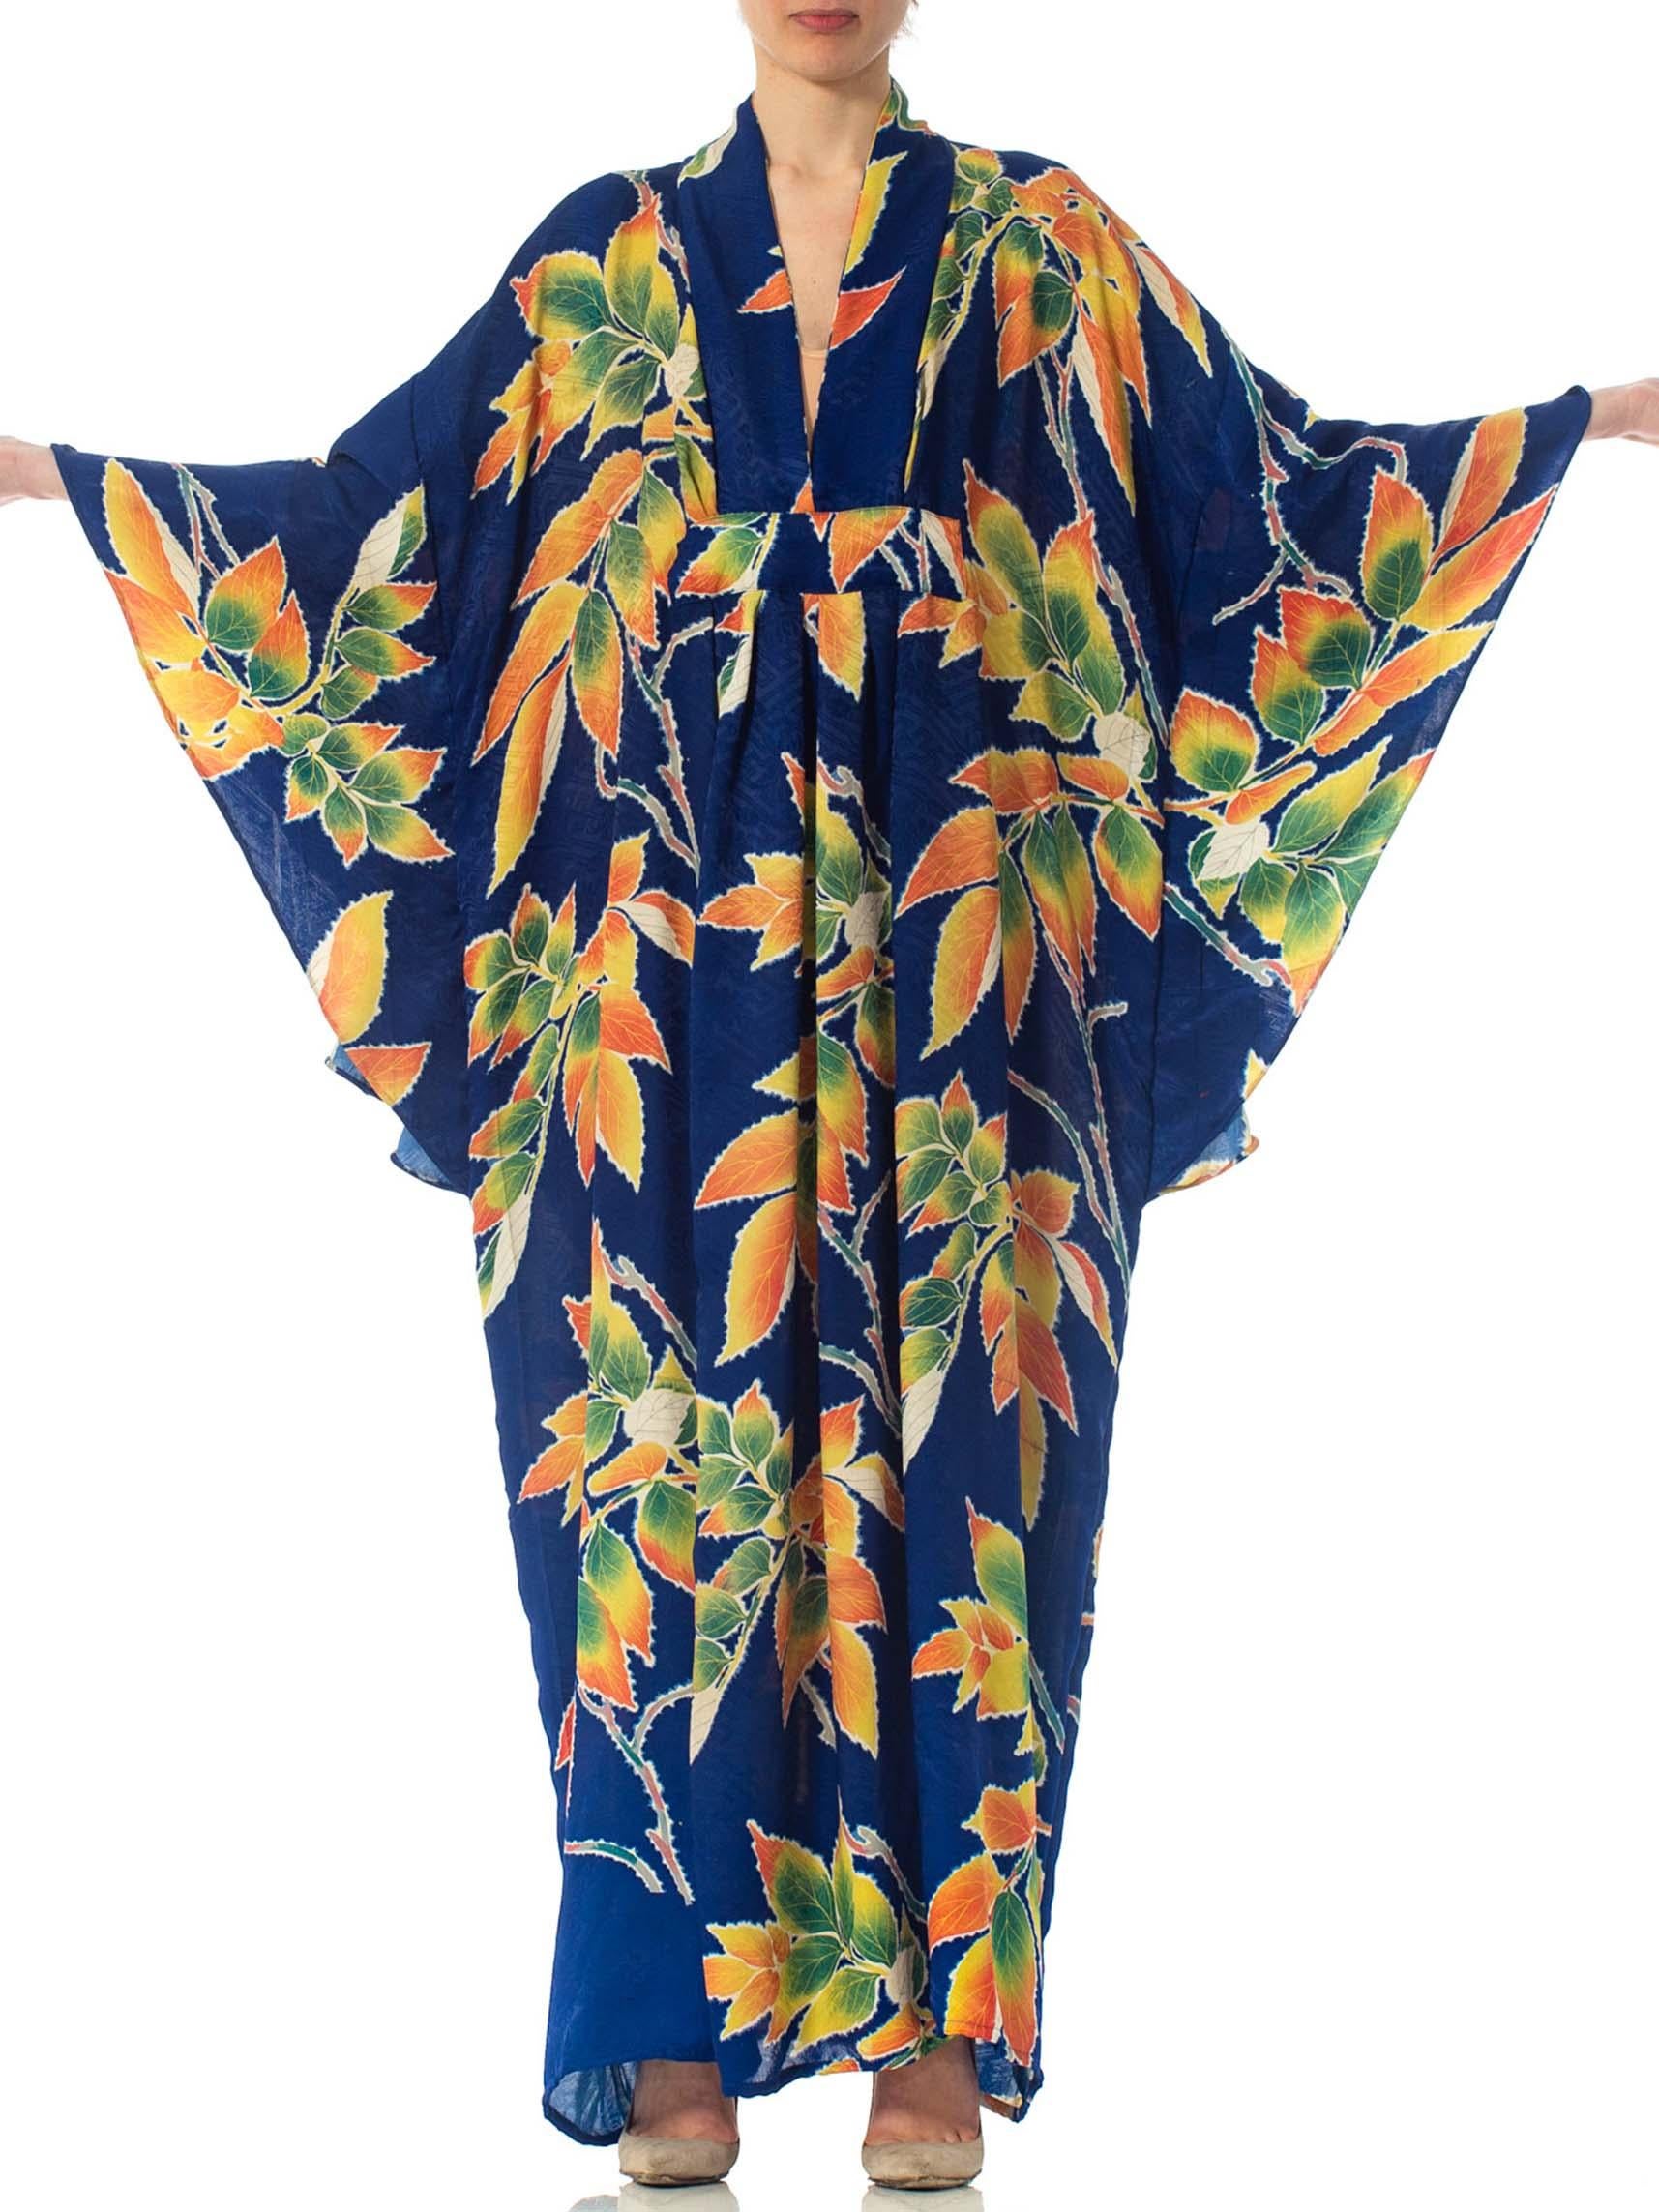 MORPHEW COLLECTION Indigo Blue Tropical Floral Silk Kaftan Made From Vintage Japanese Kimono Fabric
MORPHEW COLLECTION is made entirely by hand in our NYC Ateliér of rare antique materials sourced from around the globe. Our sustainable vintage